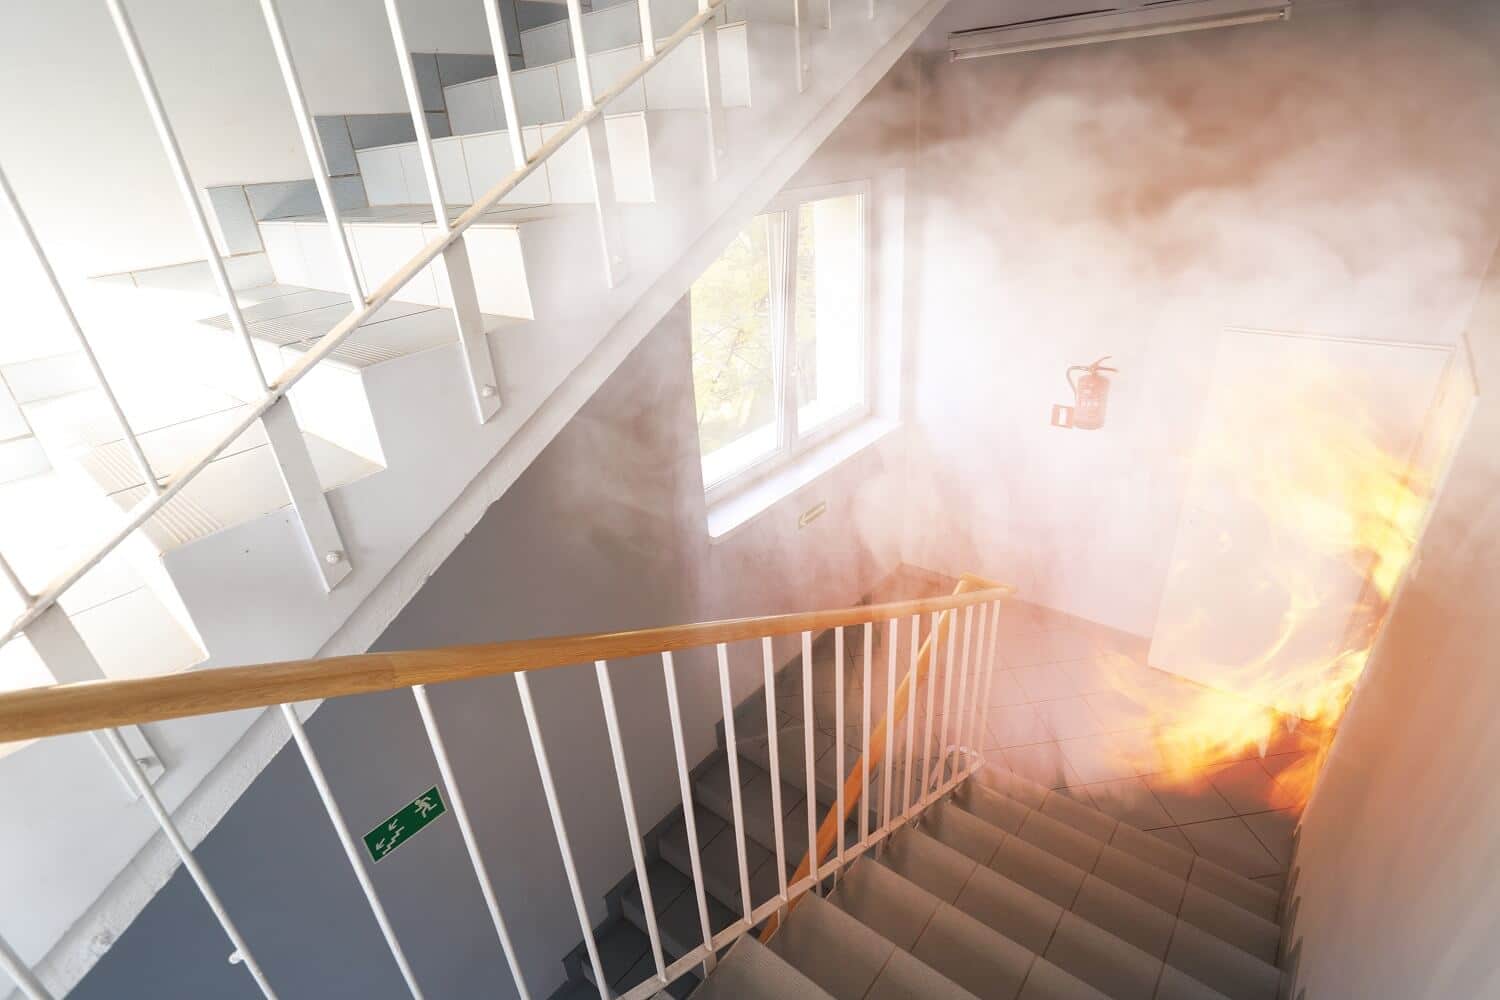 Fire on the stairs.